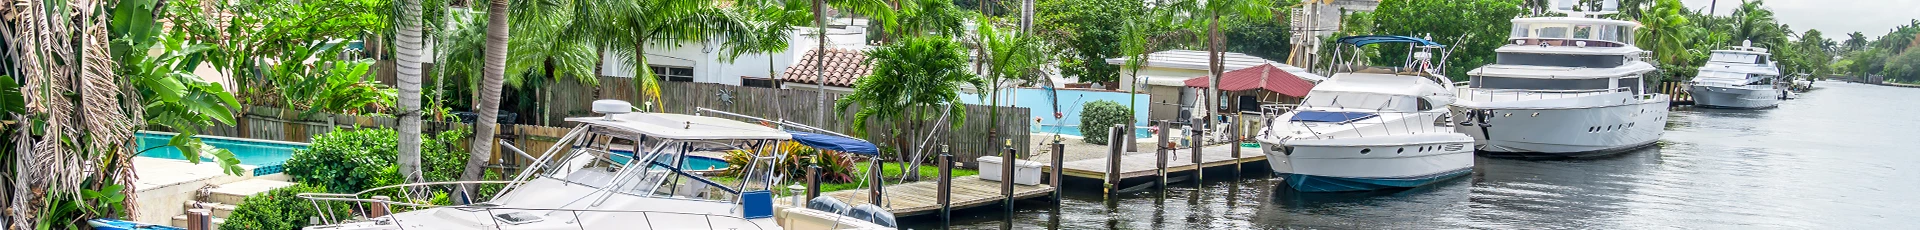 Boat Removal, Dismantle and Disposal in Lakeland Florida